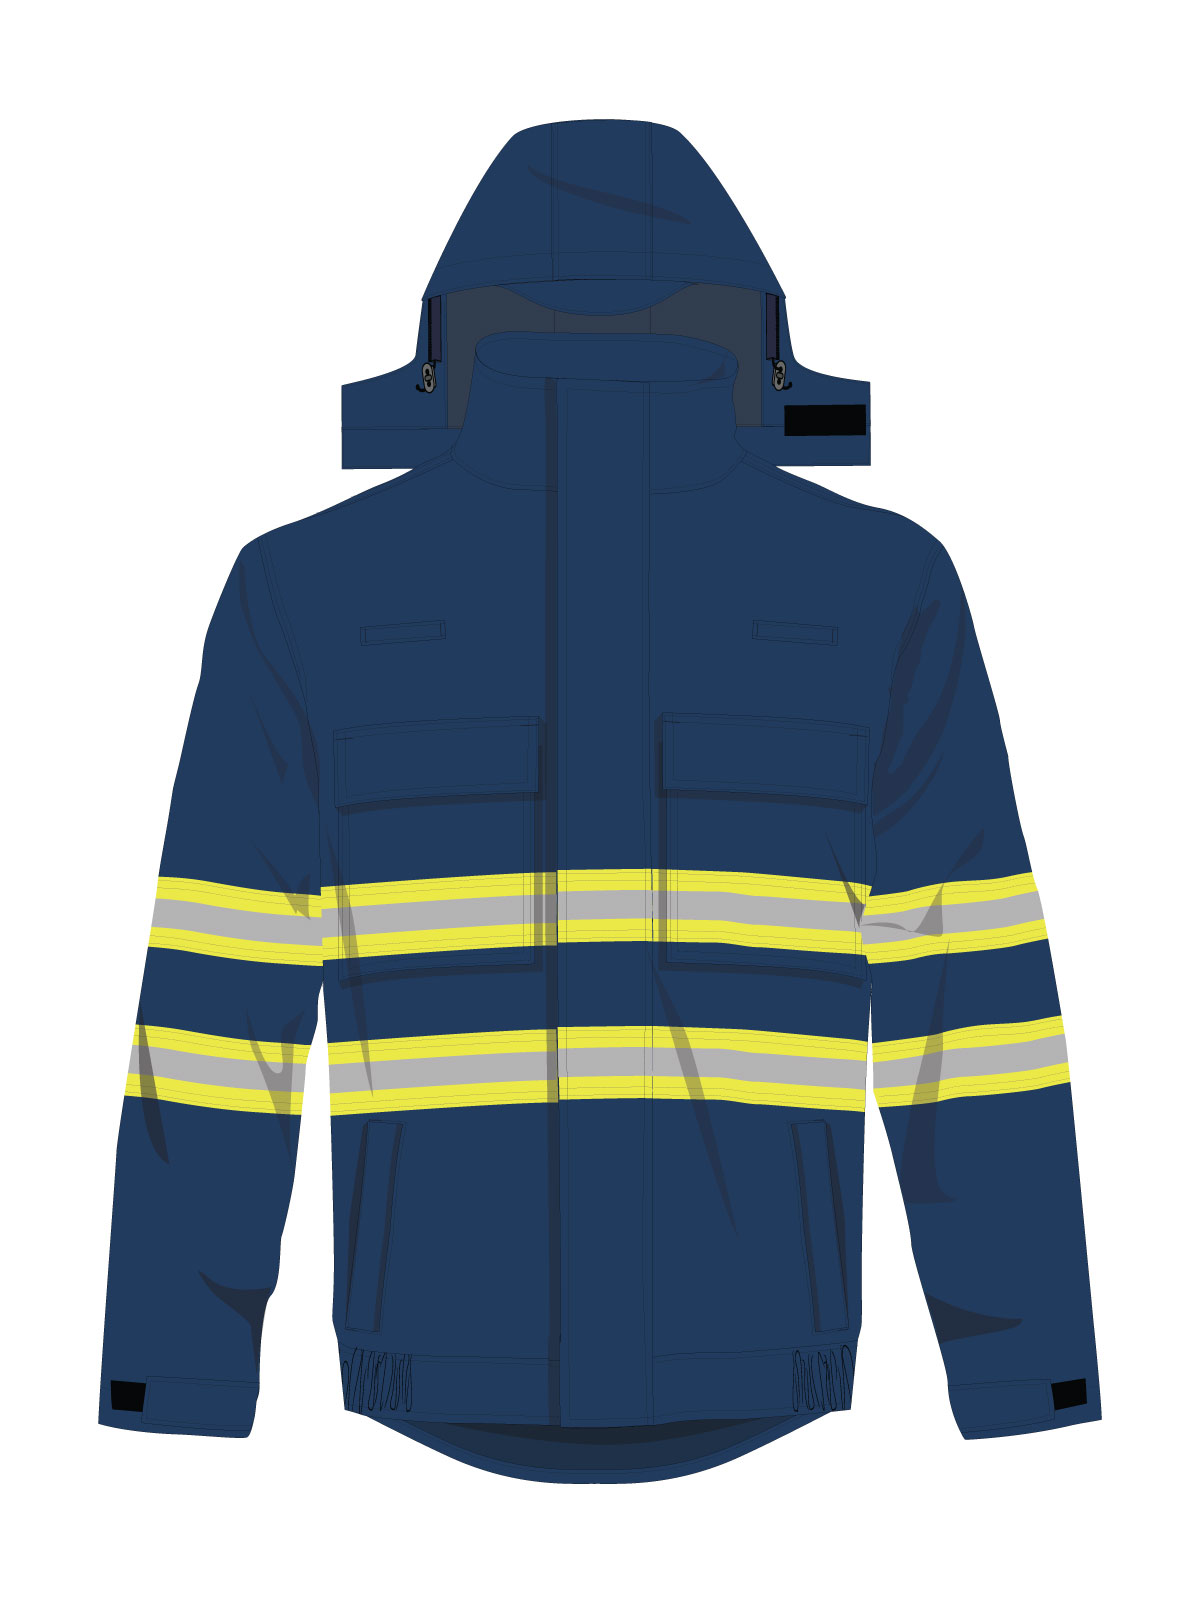 Hydropro Flame Resistant Jacket